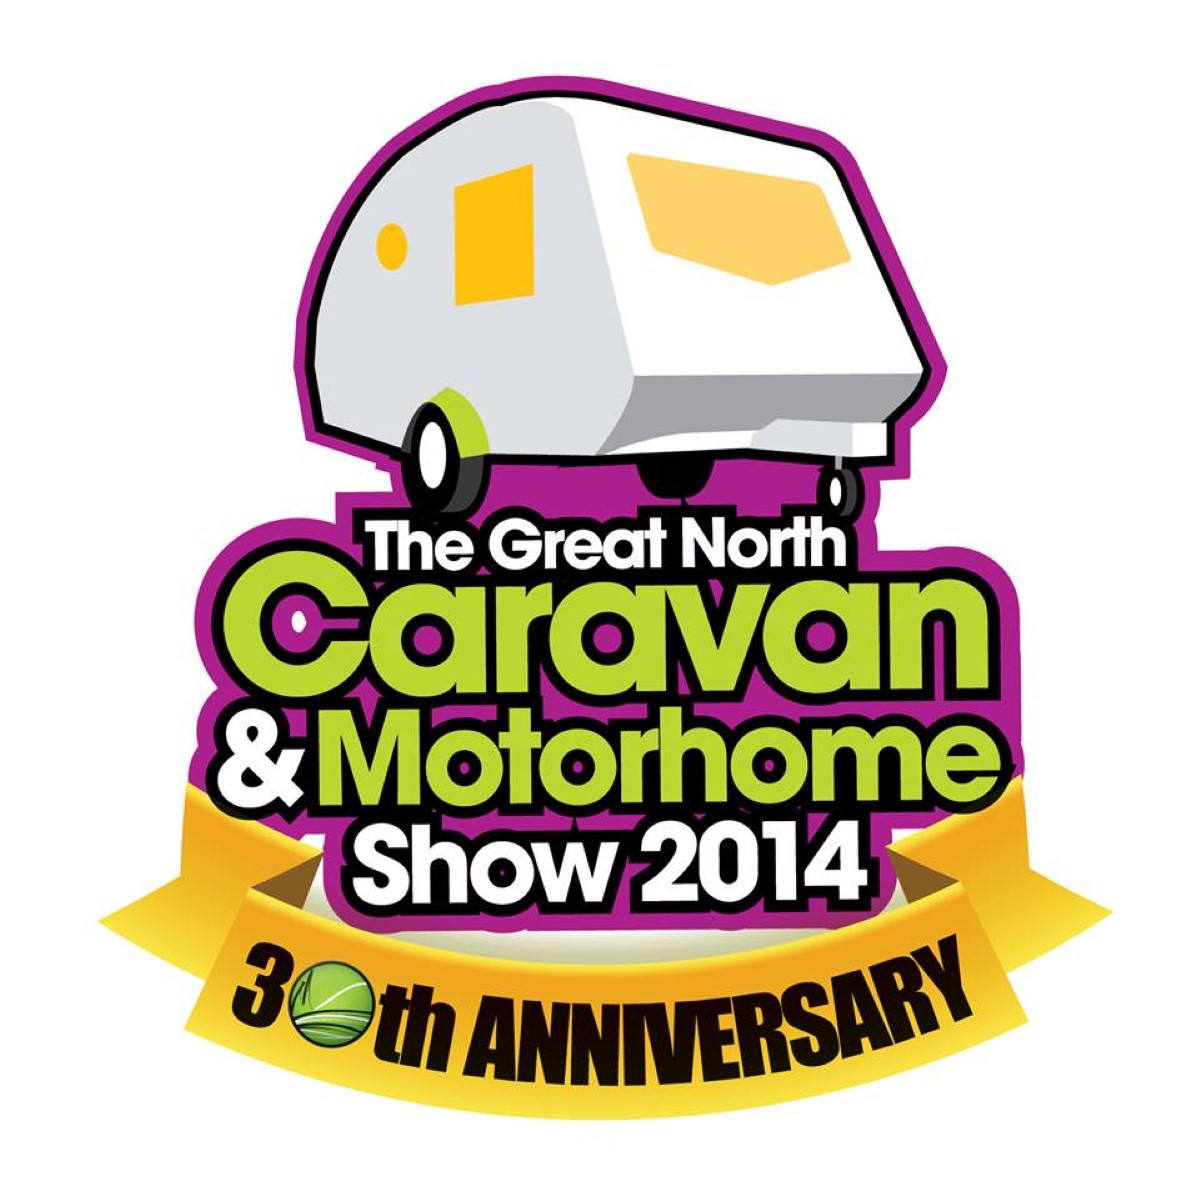 It's the 30th anniversary of The Great North Caravan & Motorhome Show